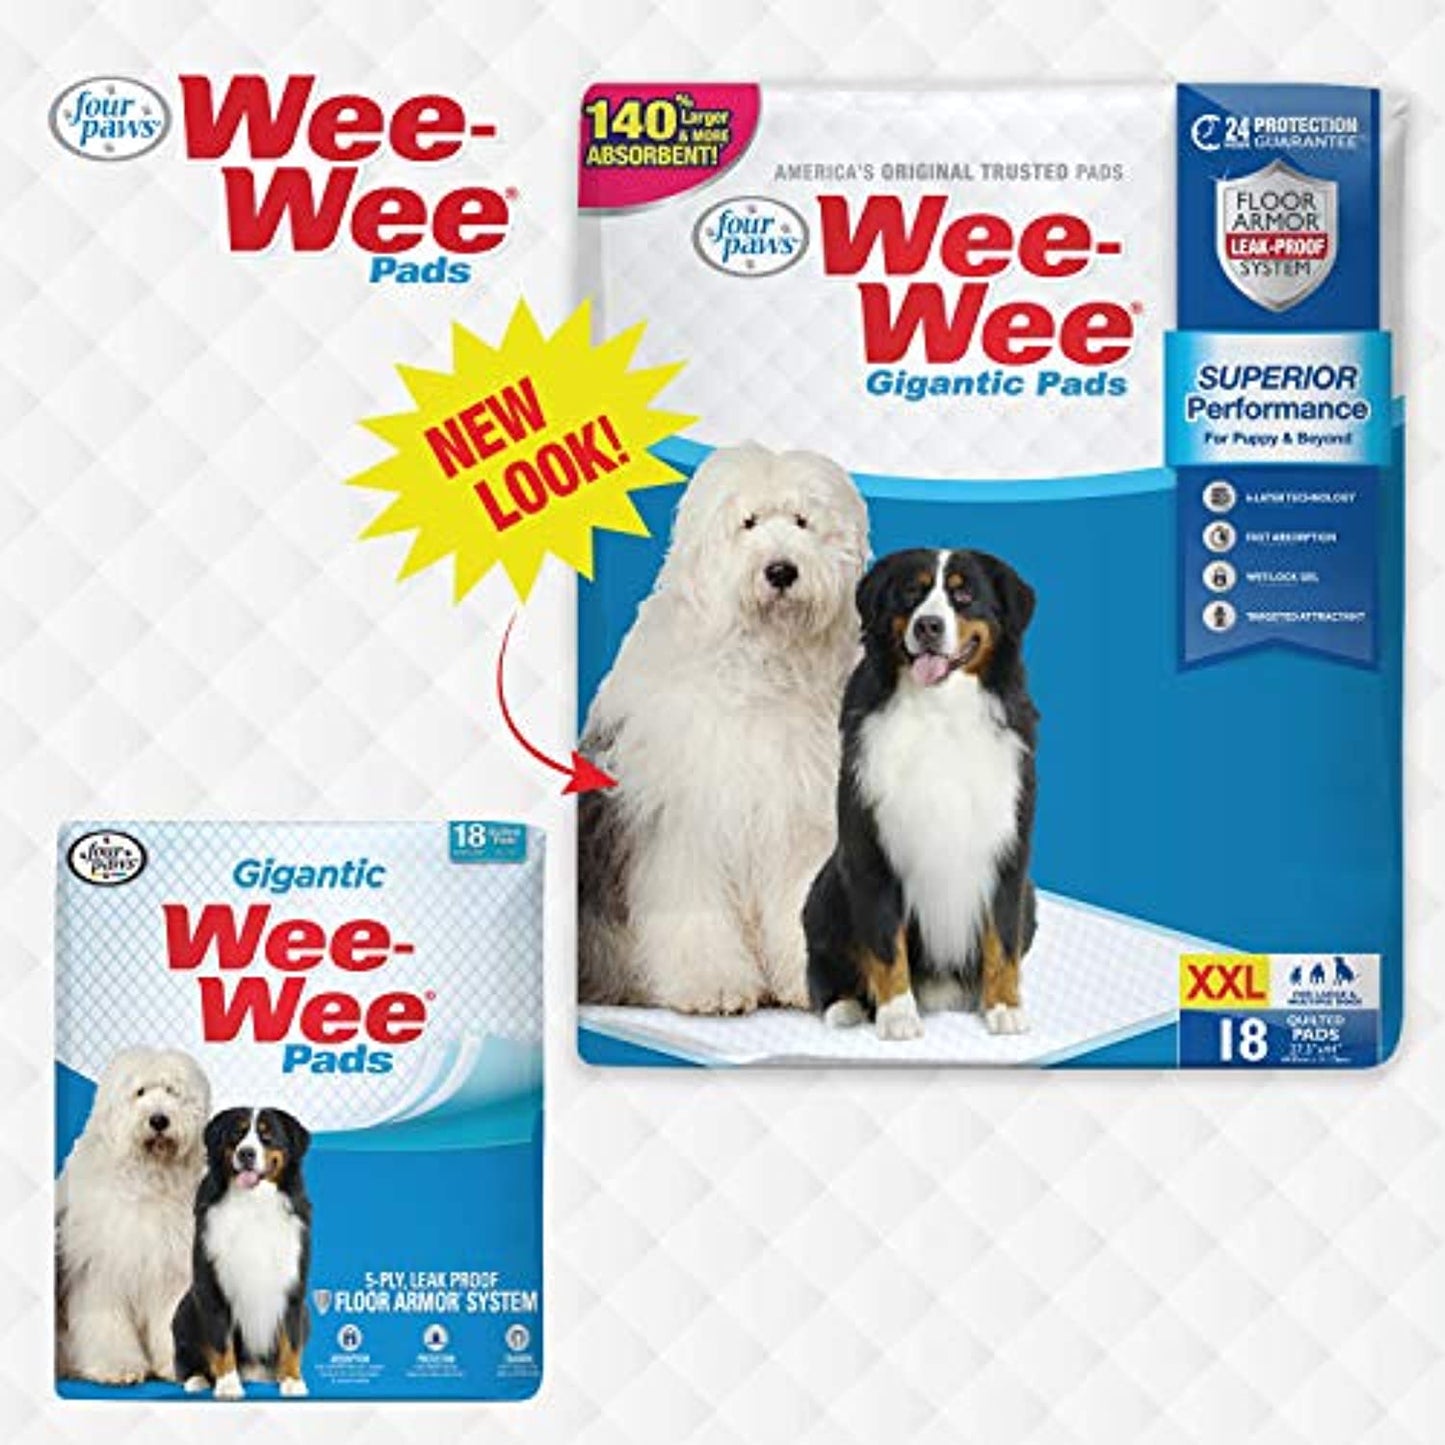 Wee-Wee Puppy Training Pee Pads 18-Count 27.5" x 44" Gigantic Size Pads for Dogs